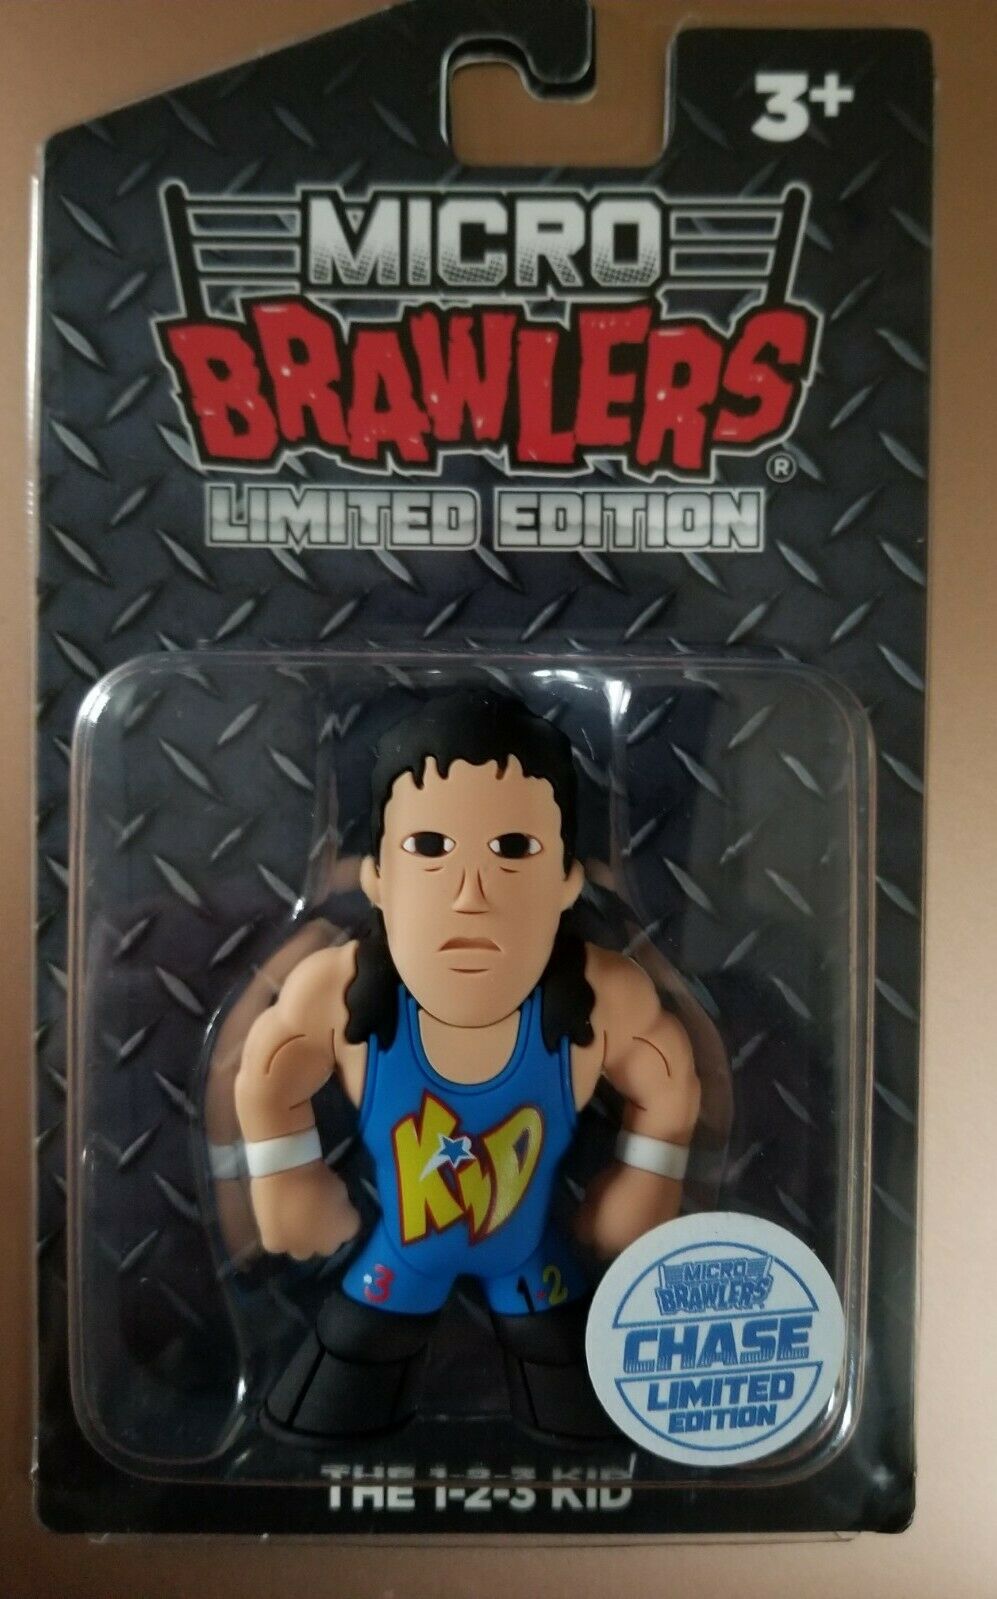 Pro Wrestling Tees Crate Exclusive Micro Brawlers 1-2-3 Kid [April, Chase]